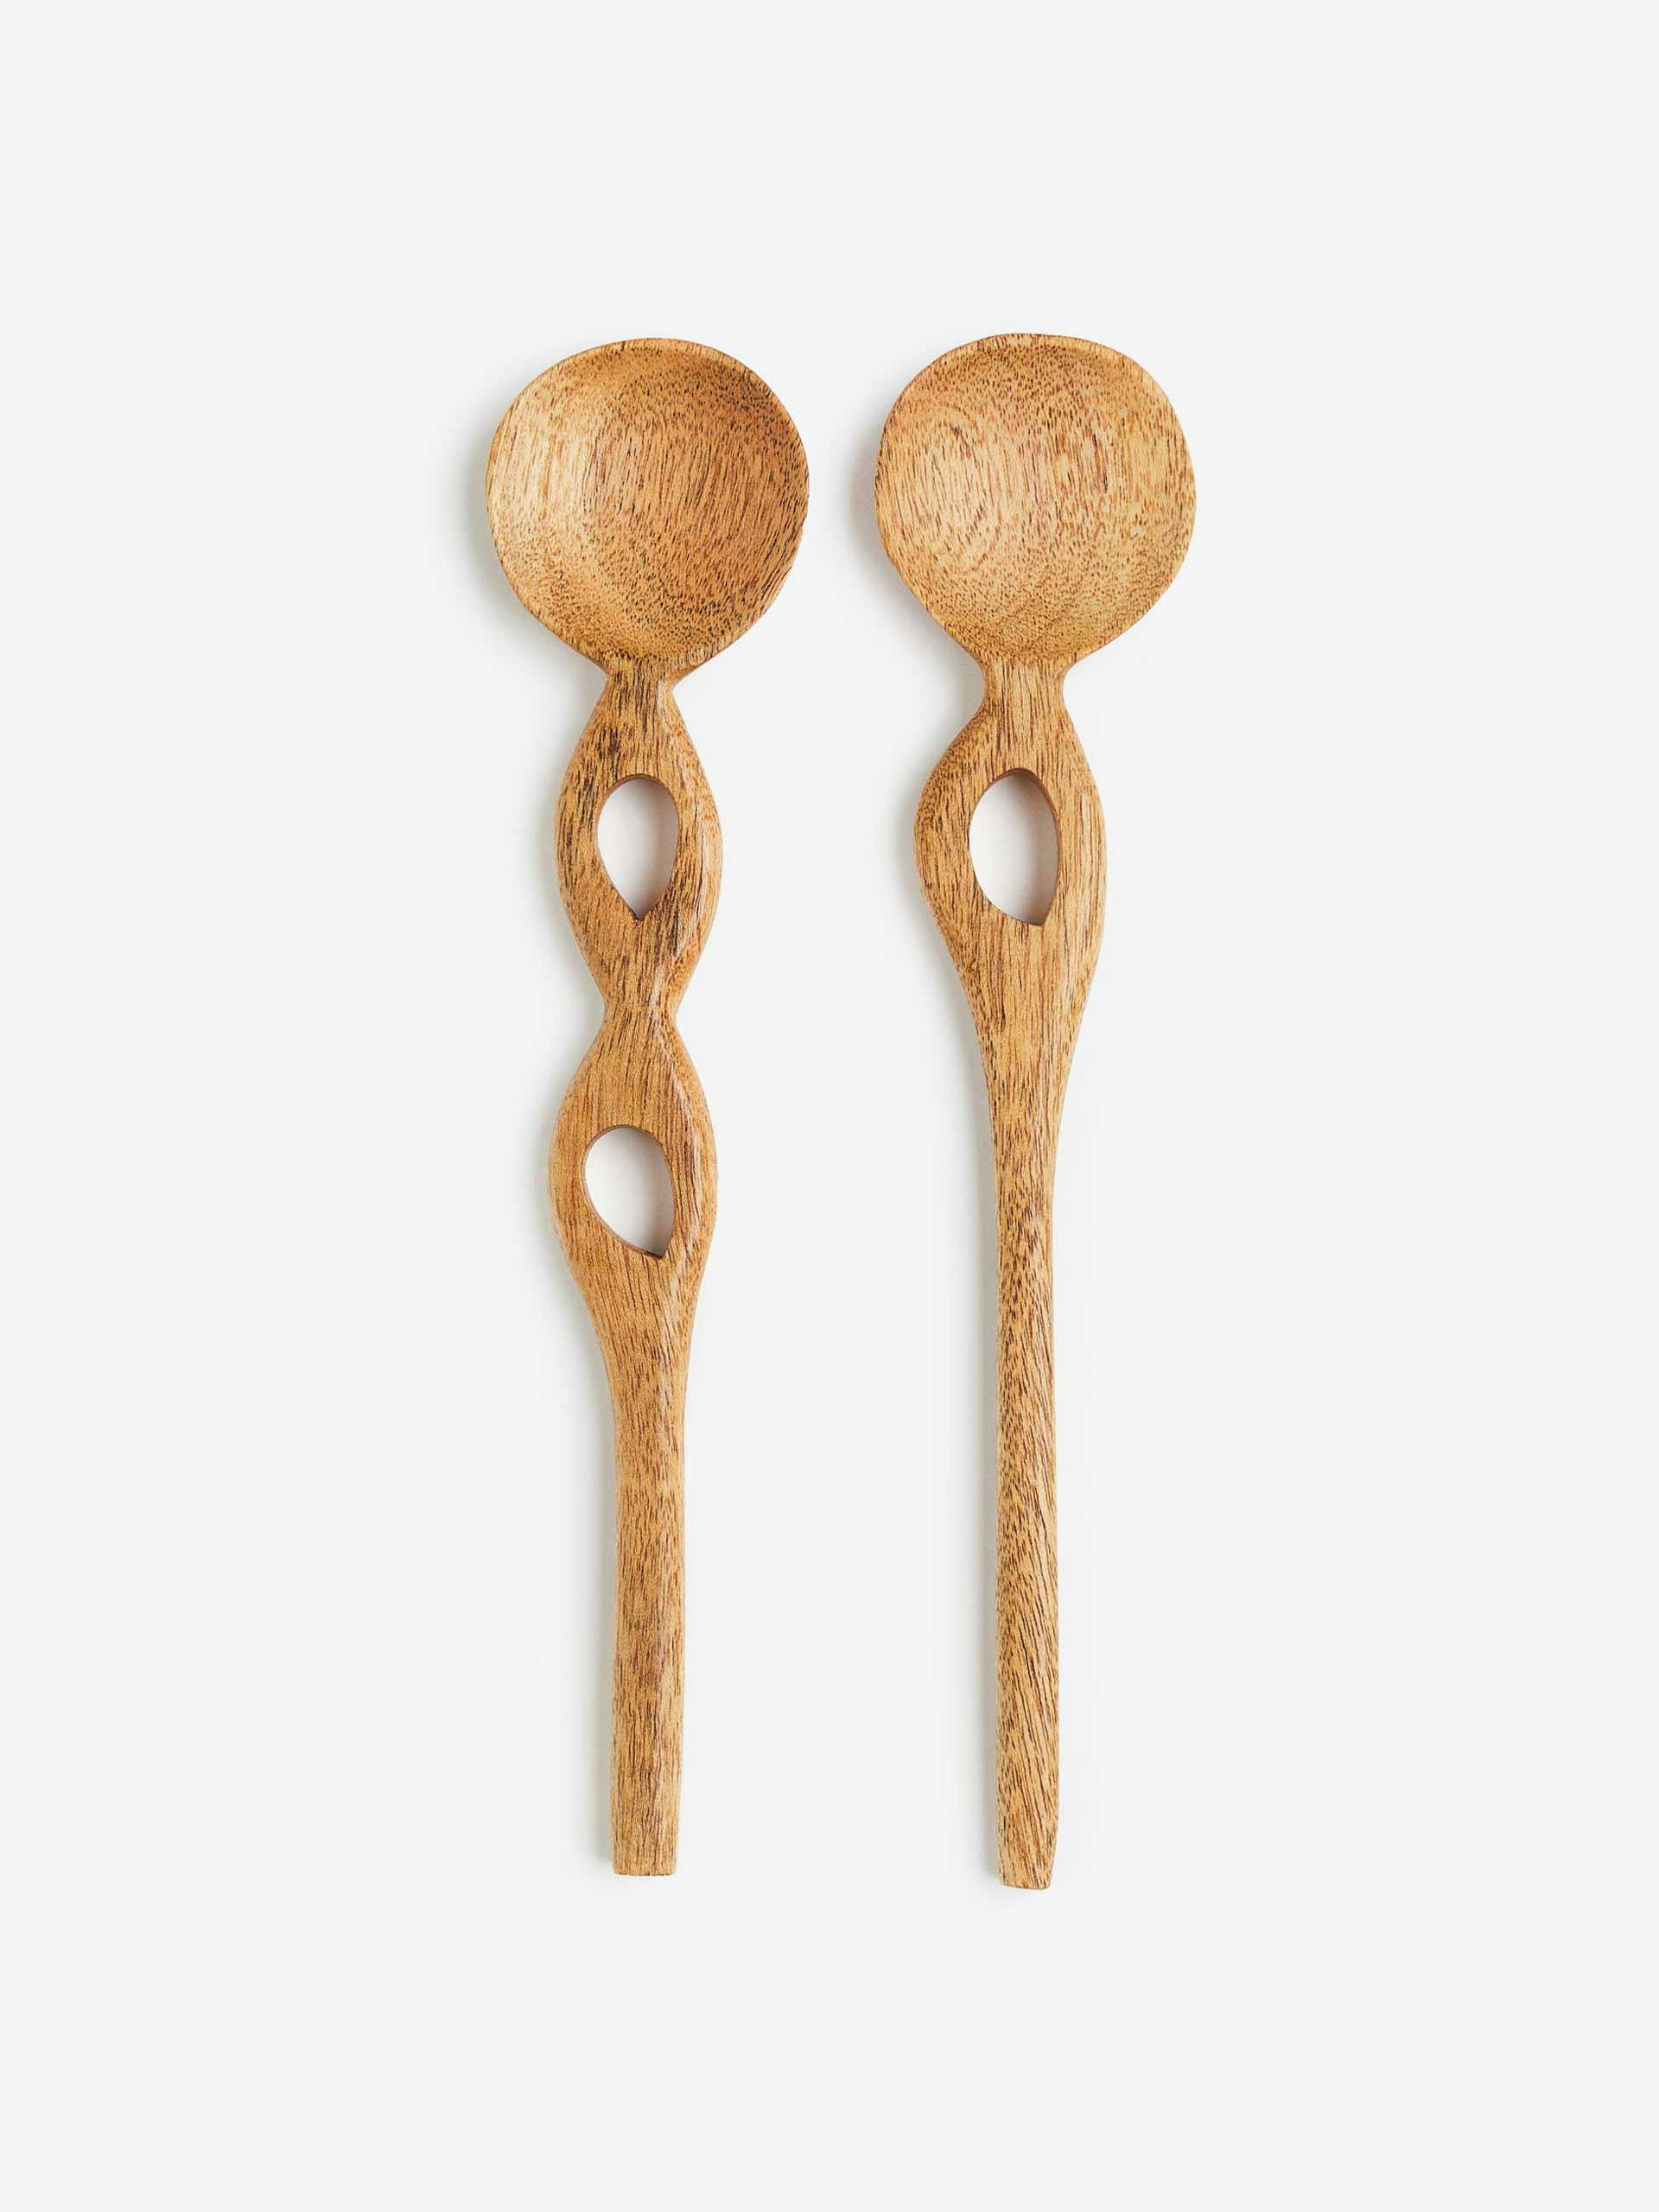 Wooden serving spoons (set of 2)